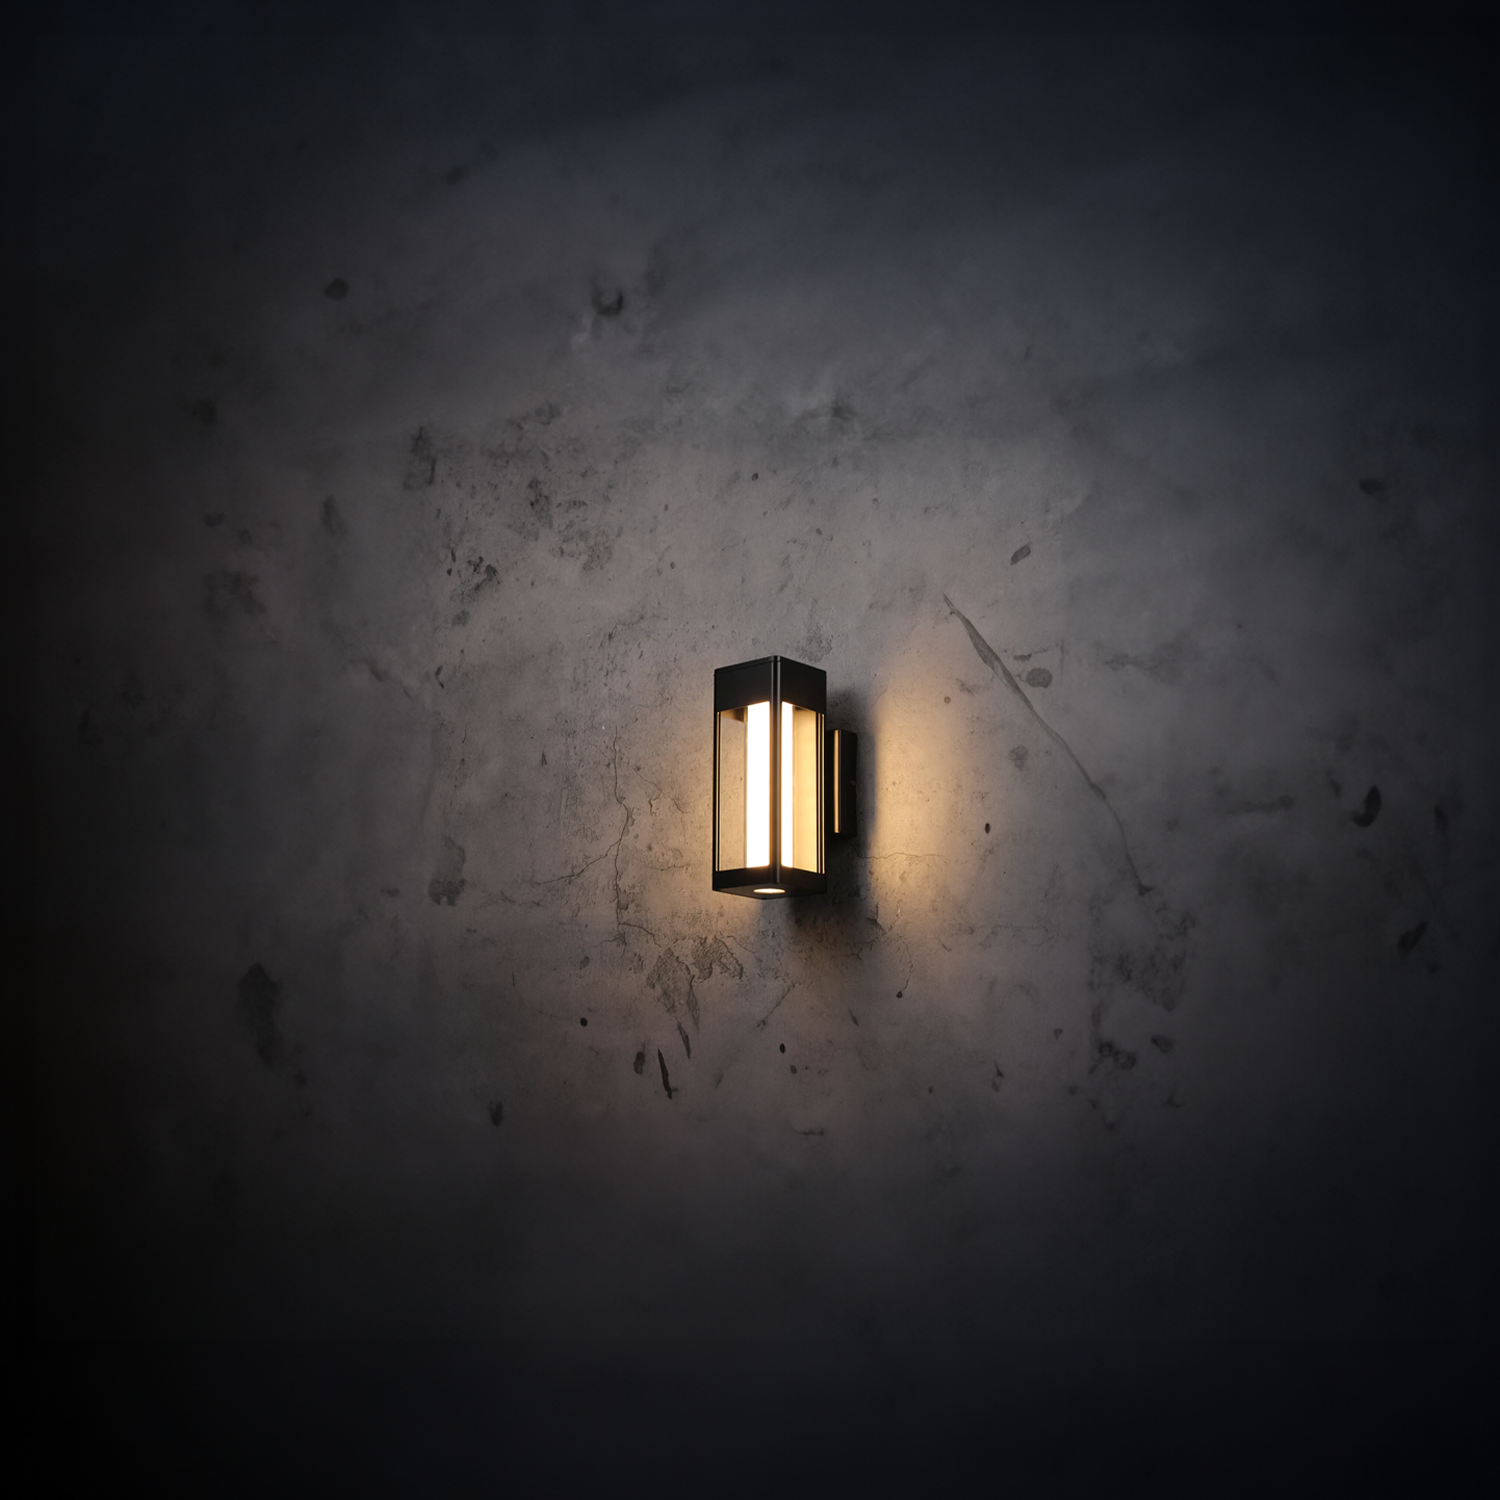 The Relic 8W Outdoor Wall Sconce